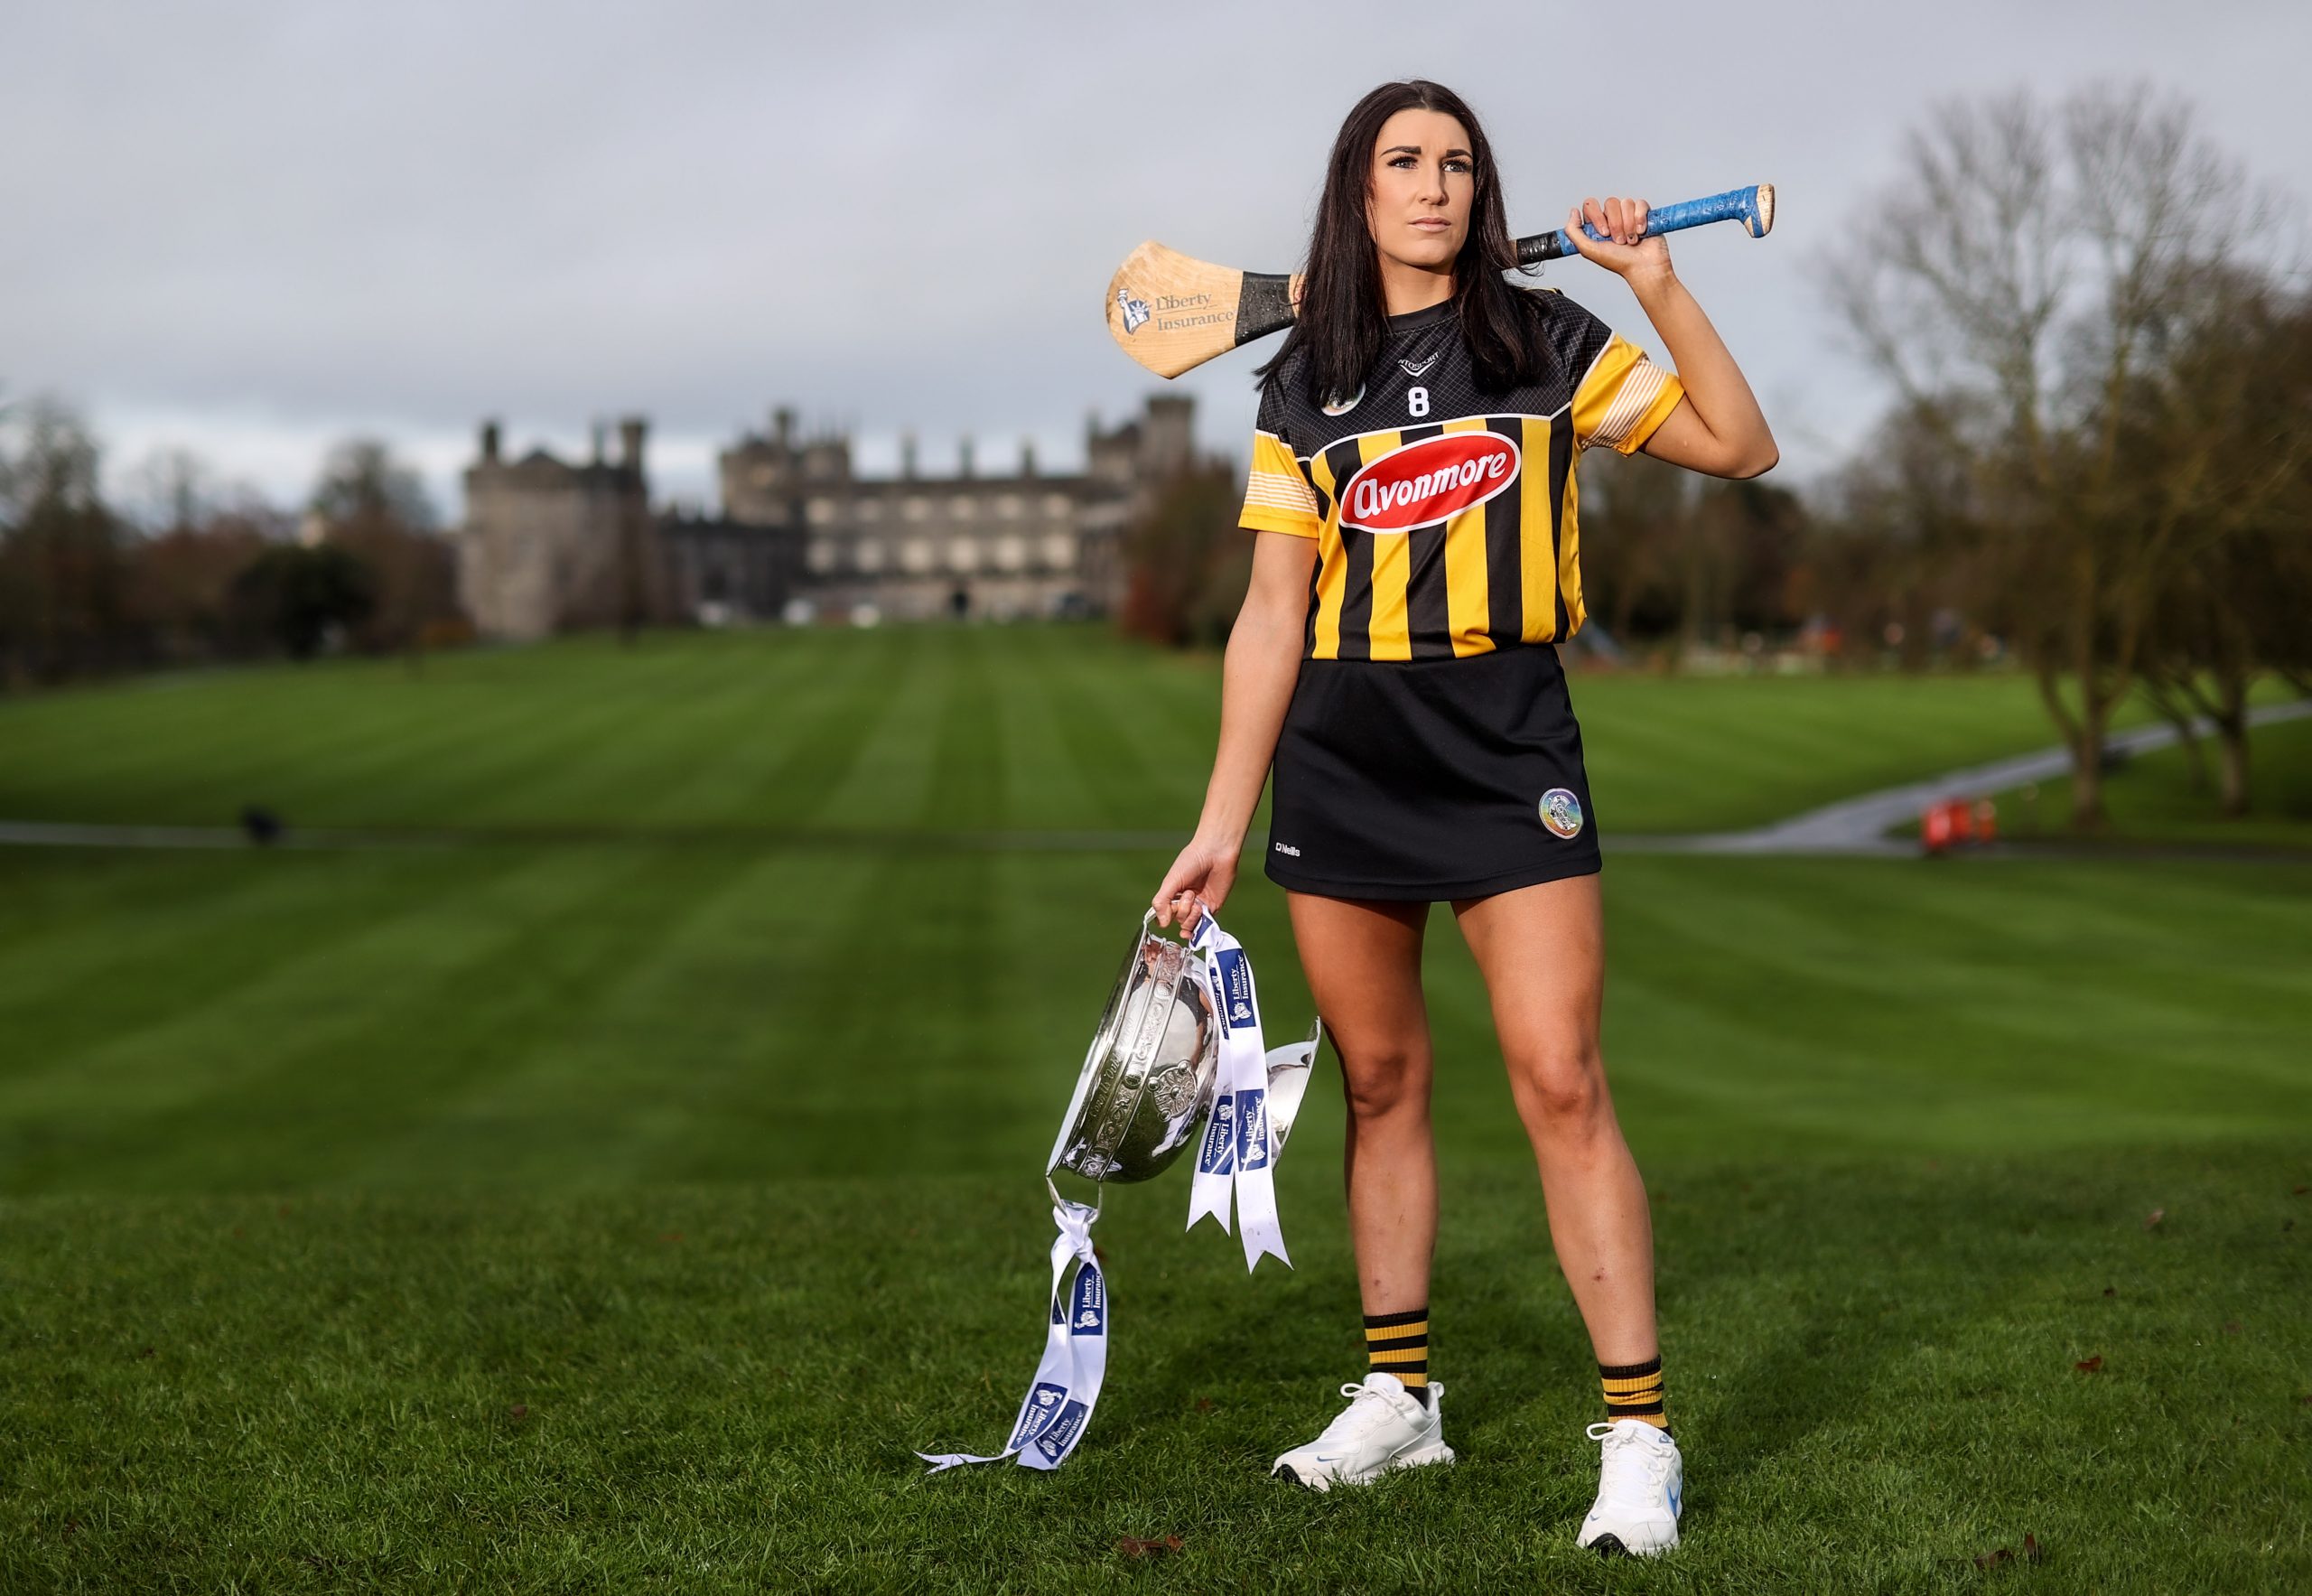 Galway and Kilkenny set for Liberty Insurance All-Ireland Senior Camogie Championship Final this Saturday